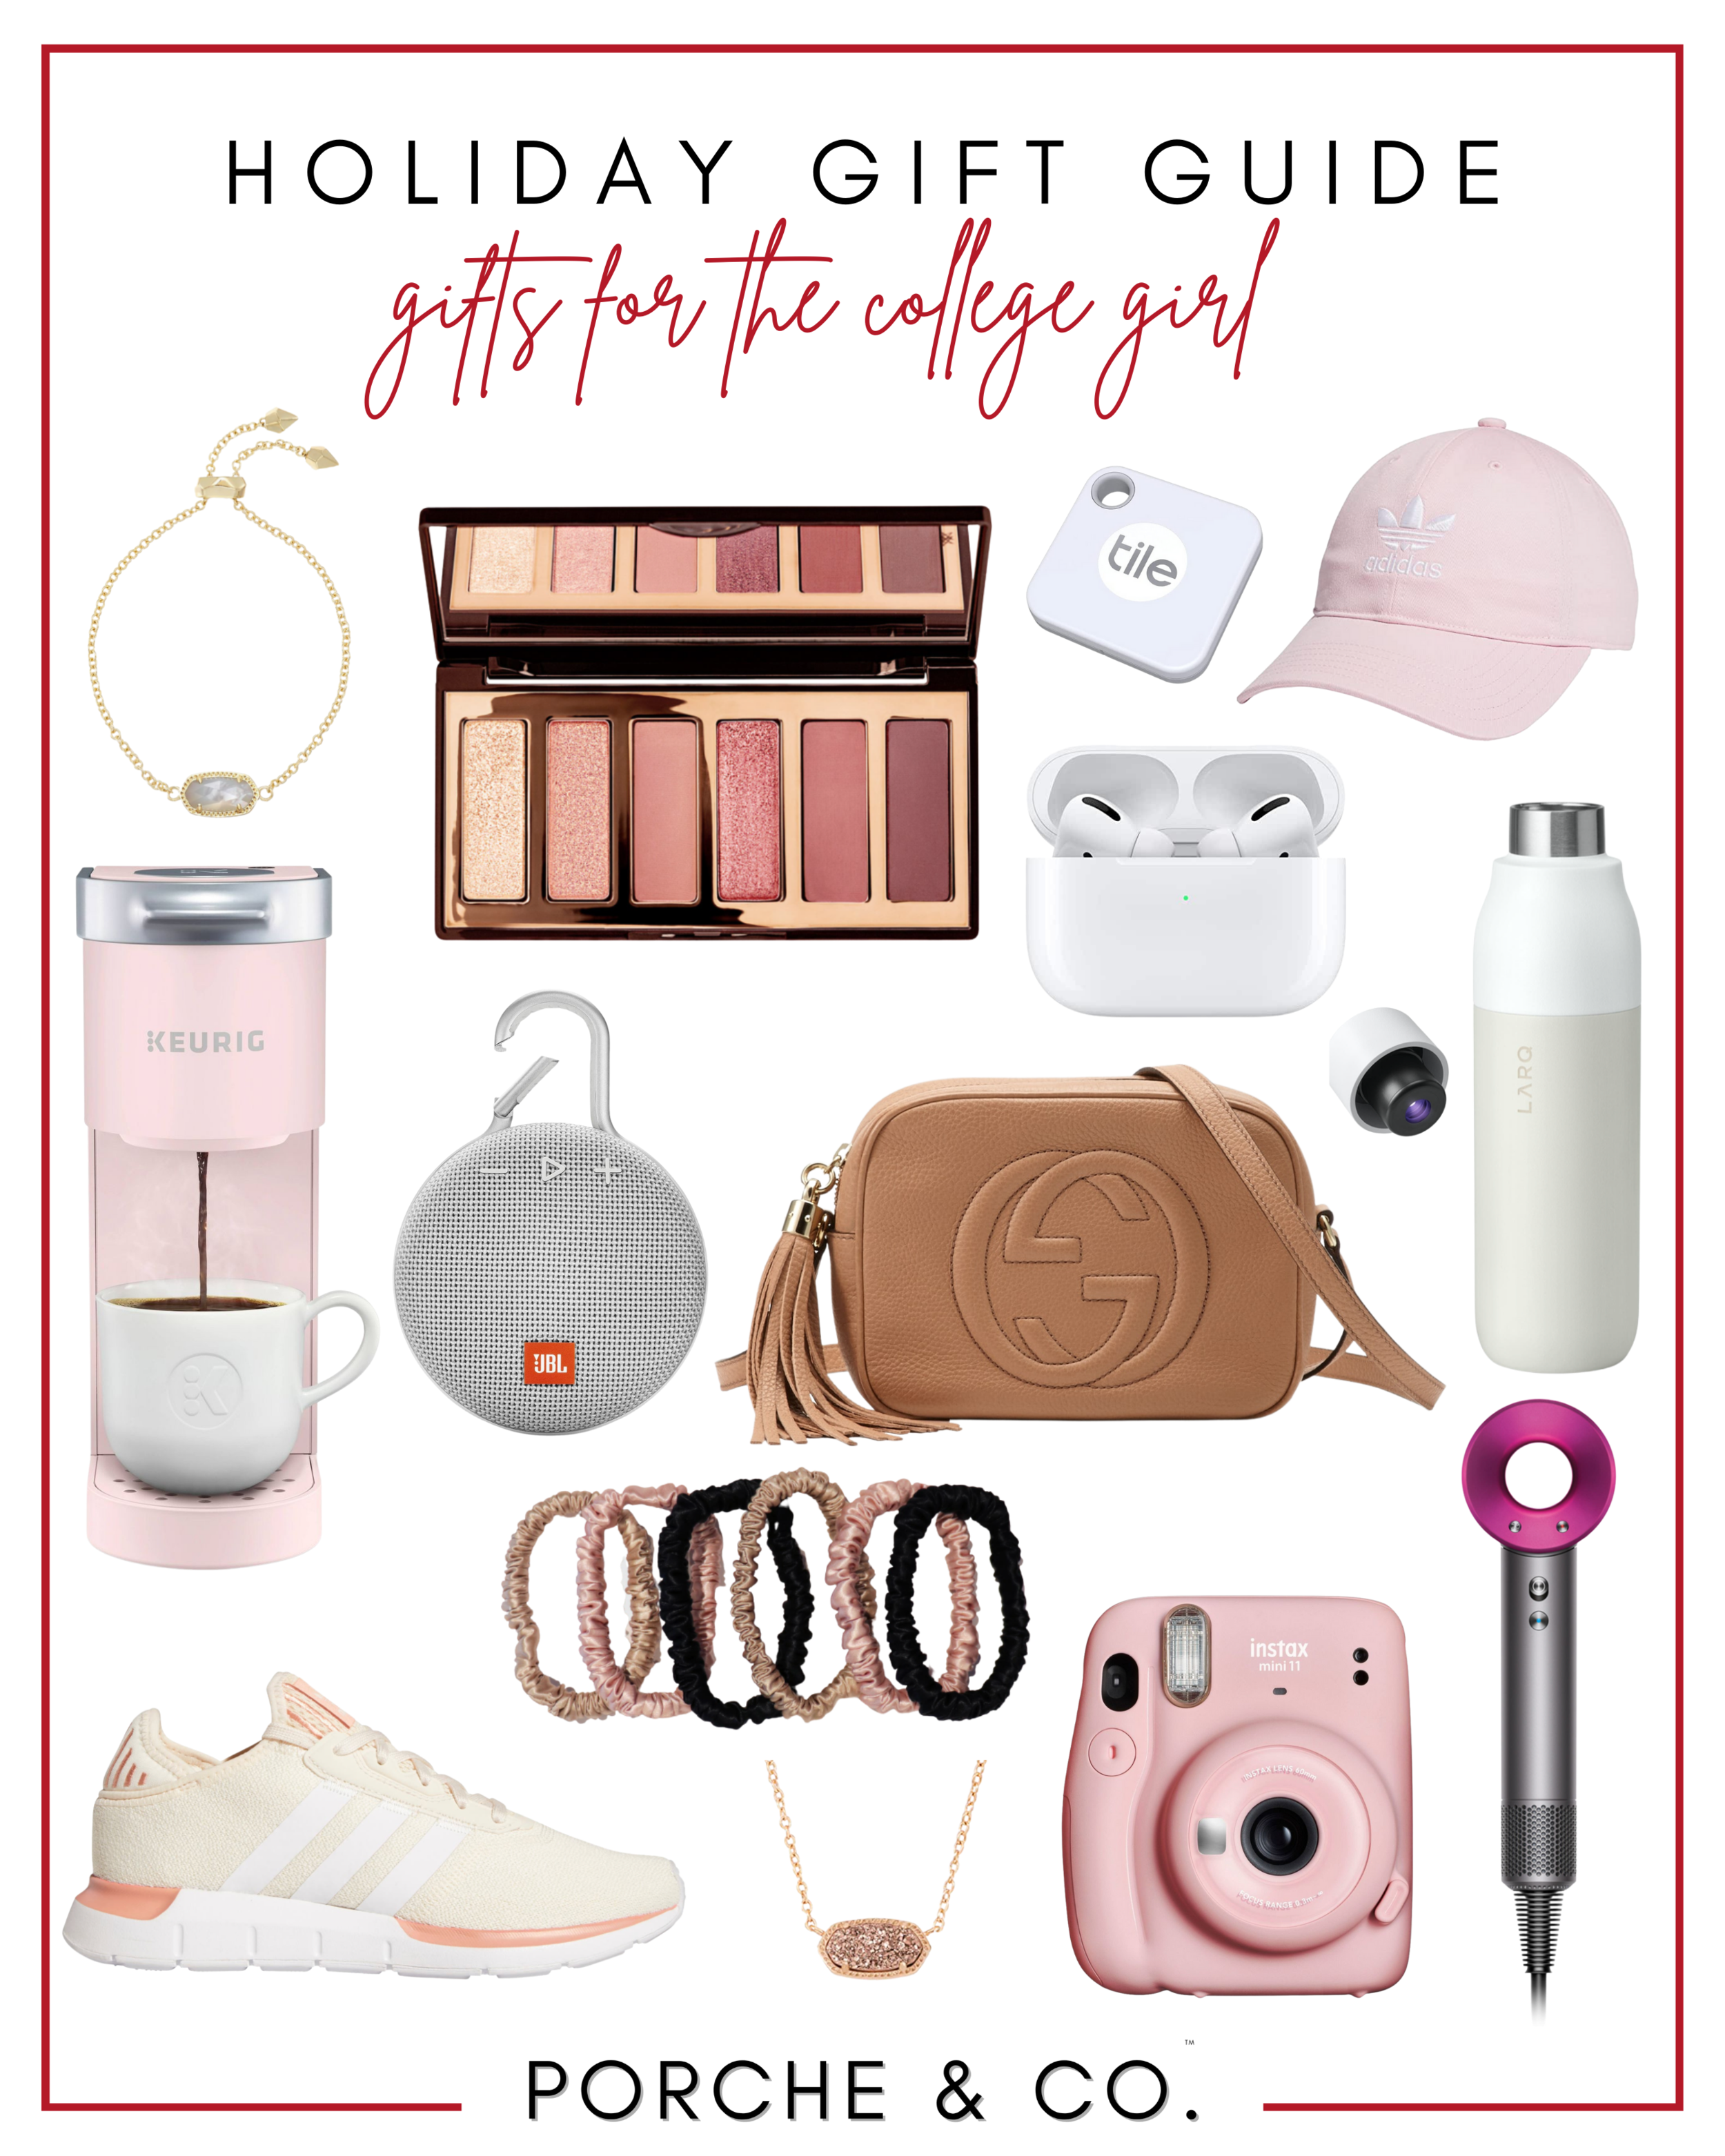 Gifts for the College Girl — Porche & Co.